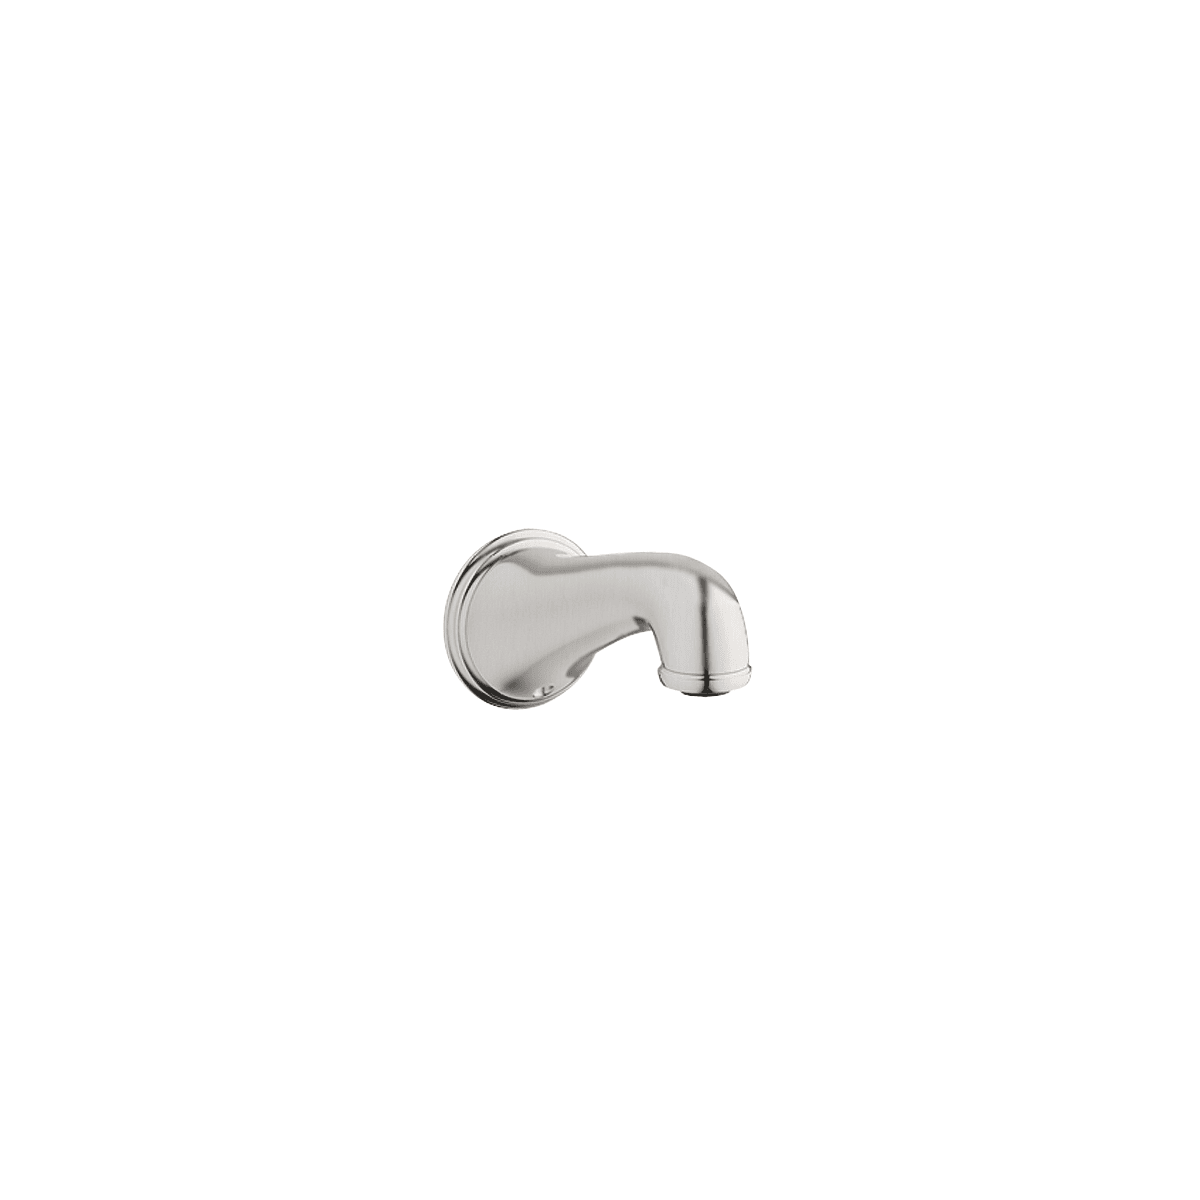 Grohe 13612en0 Brushed Nickel Geneva 6 1 8 Wall Mounted Tub Spout